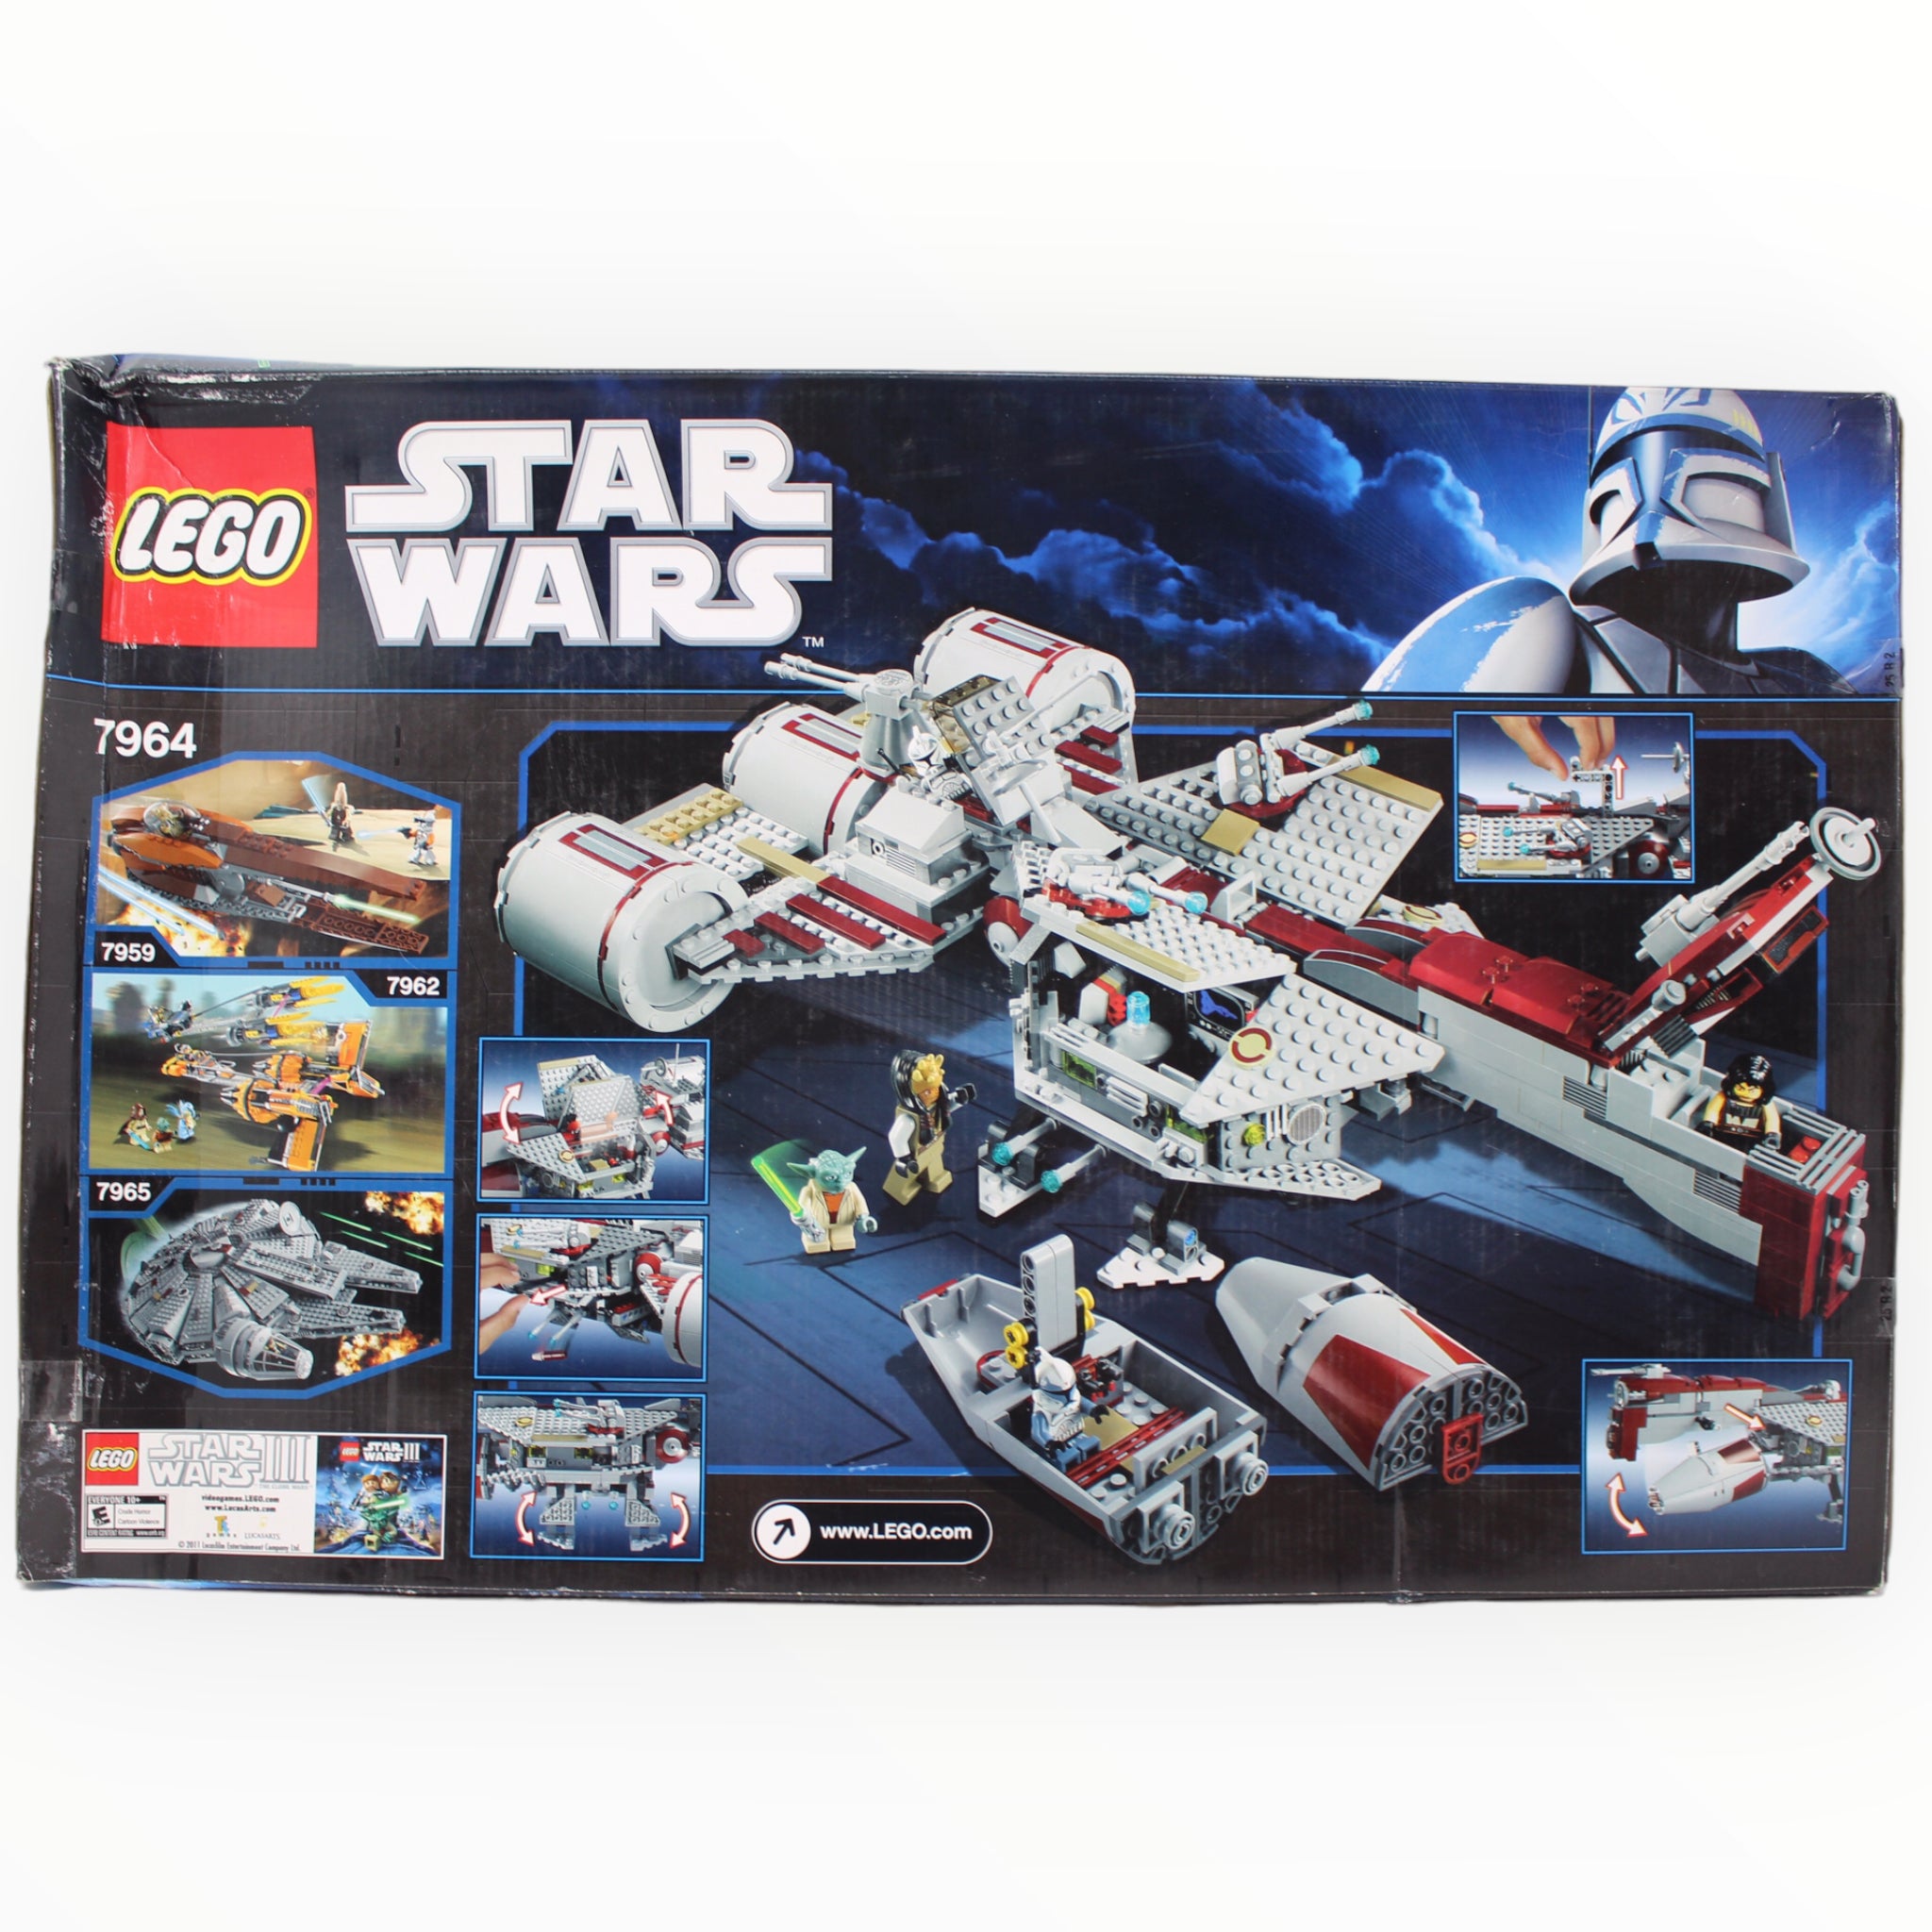 Retired Sets 7144 and 7110 Star Wars Value Pack